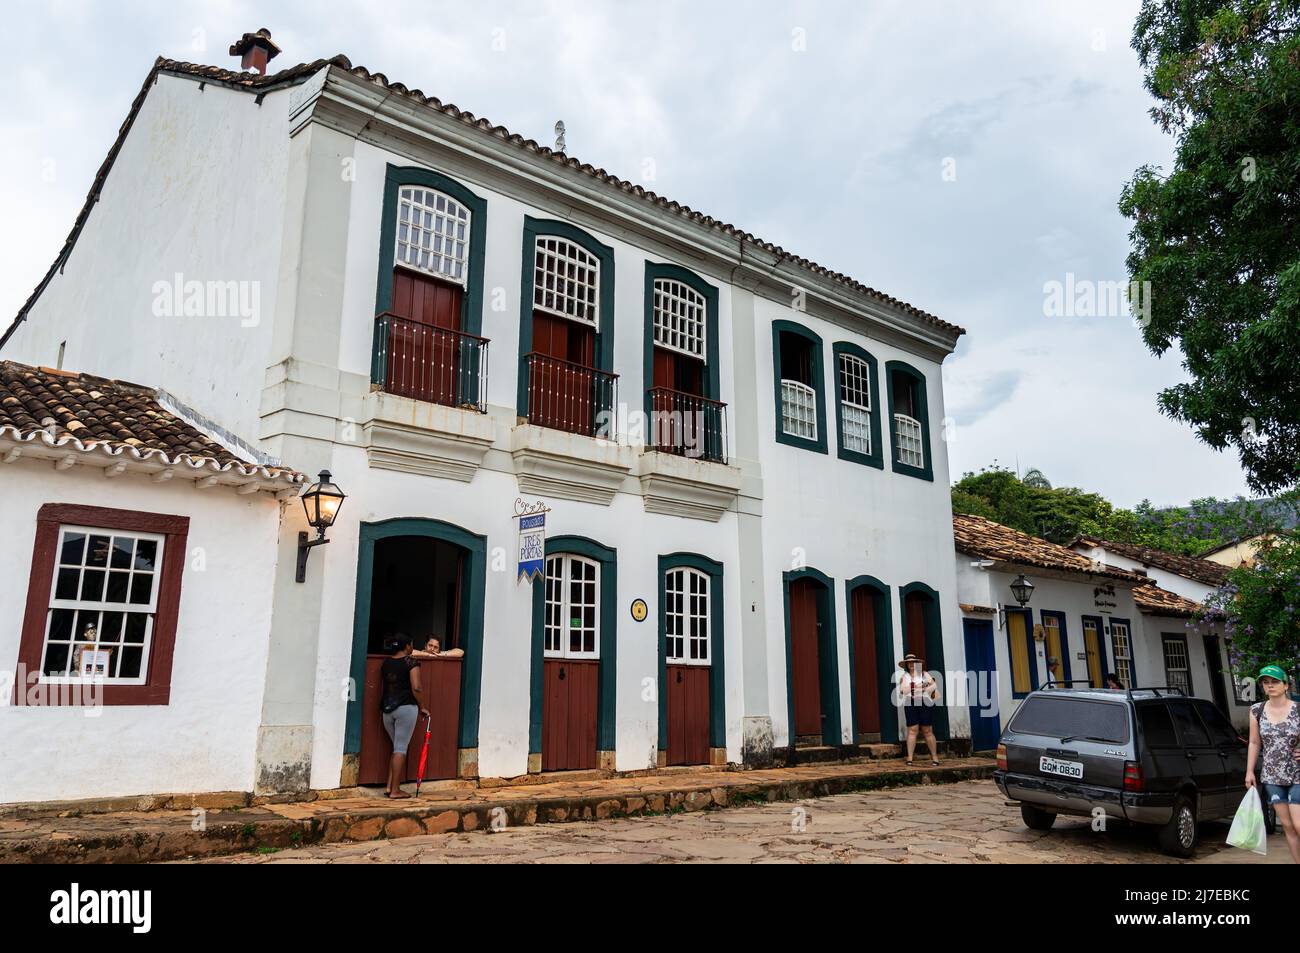 Facade of Tres Portas inn, a small hotel located at east end of Direita street in Tiradentes historical center under clouded sky. Stock Photo